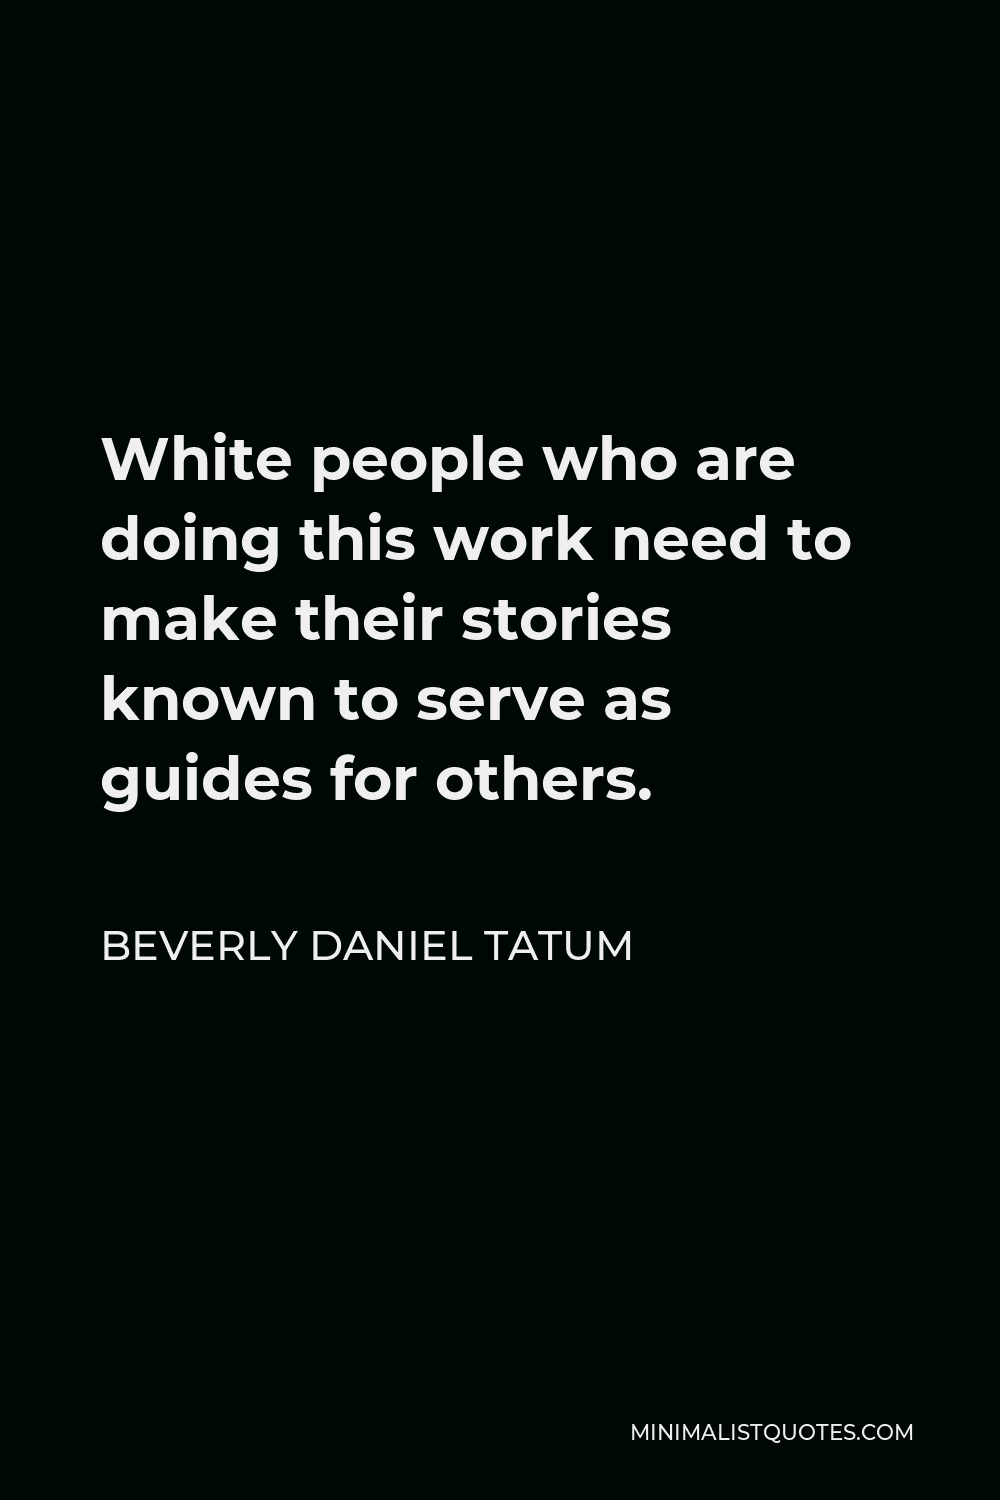 Beverly Daniel Tatum Quote - White people who are doing this work need to make their stories known to serve as guides for others.